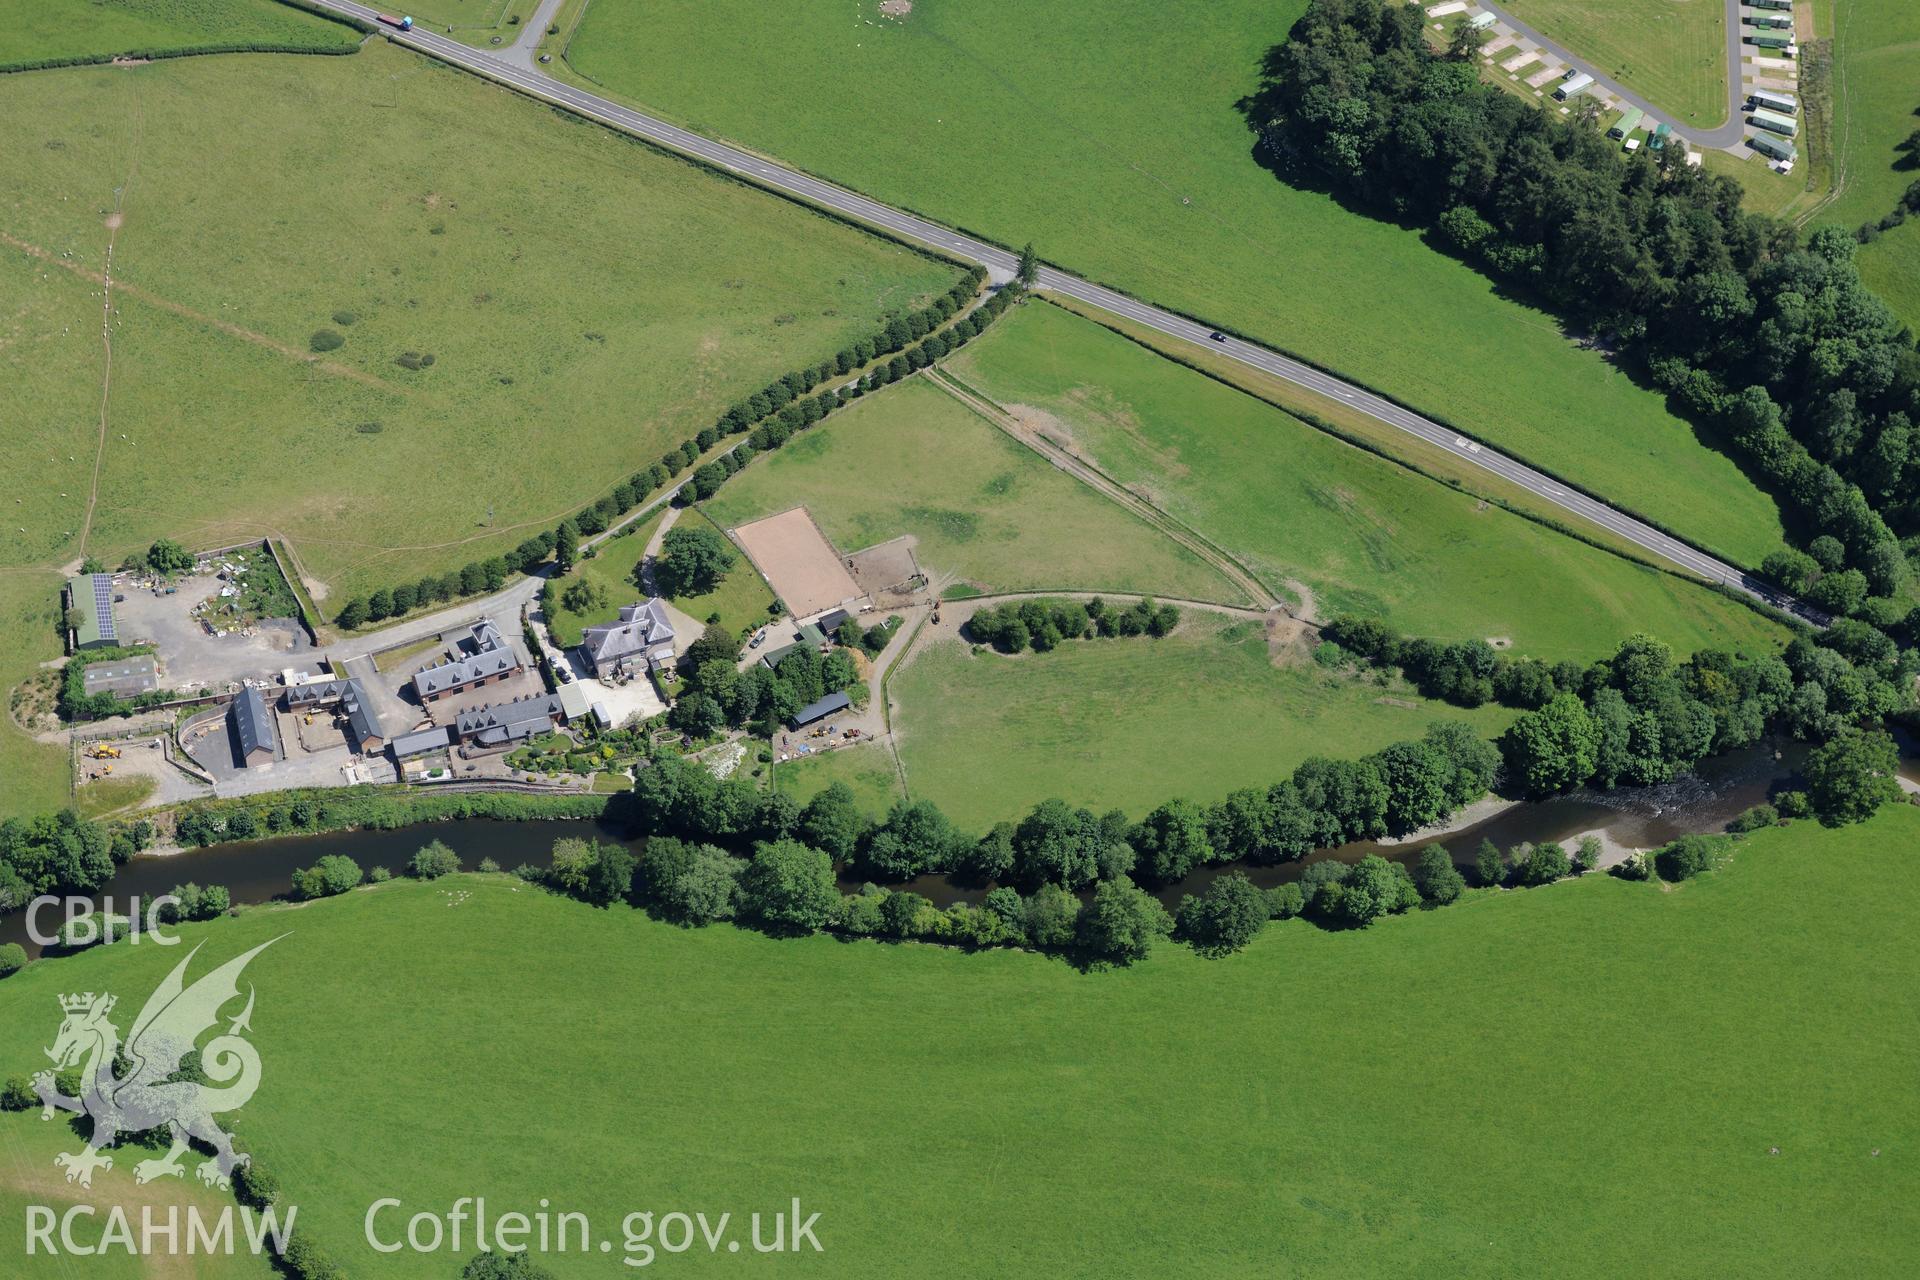 Glanhafren house and garden, and the Roman road which runs through its grounds, west of Newtown. Oblique aerial photograph taken during the Royal Commission's programme of archaeological aerial reconnaissance by Toby Driver on 30th June 2015.